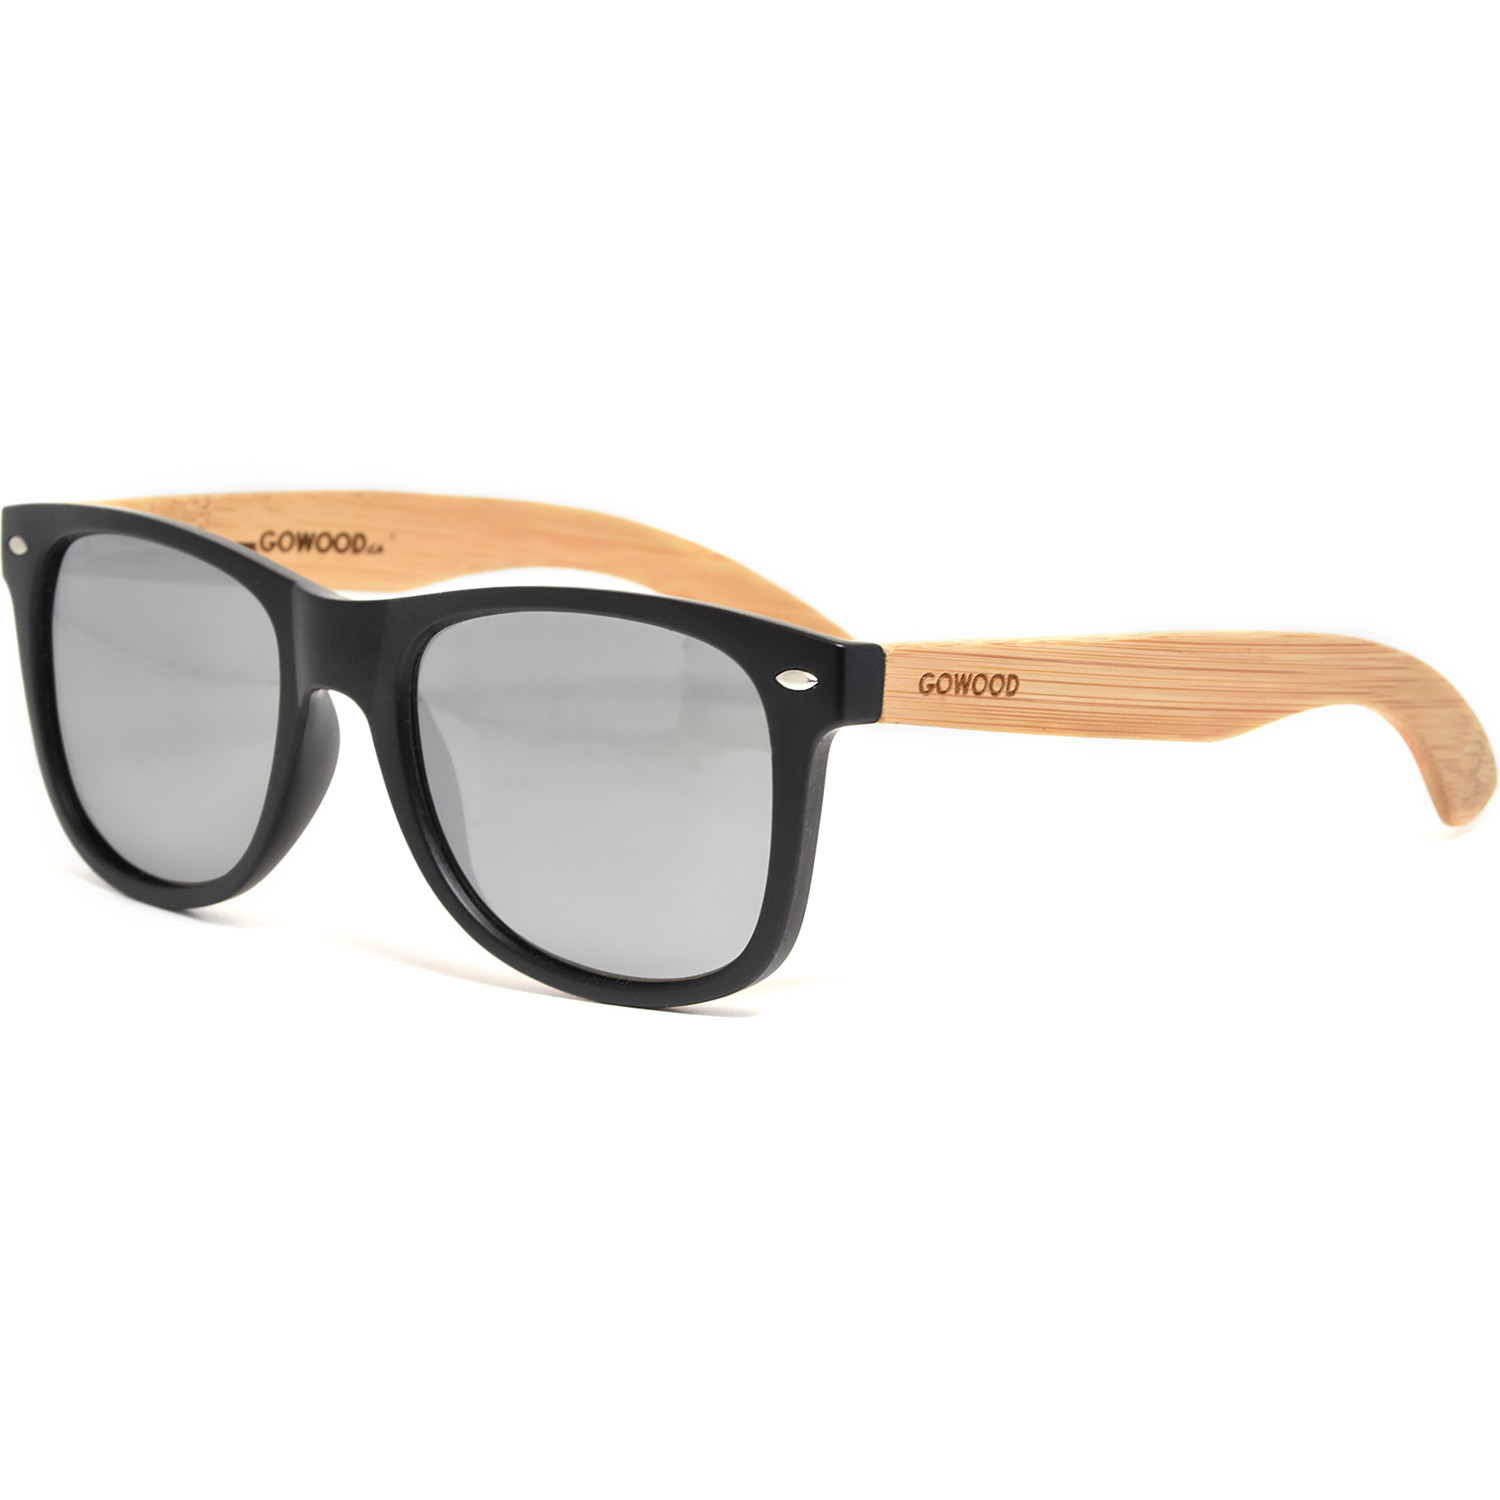 Bamboo wood wayfarer sunglasses with silver mirrored polarized lenses